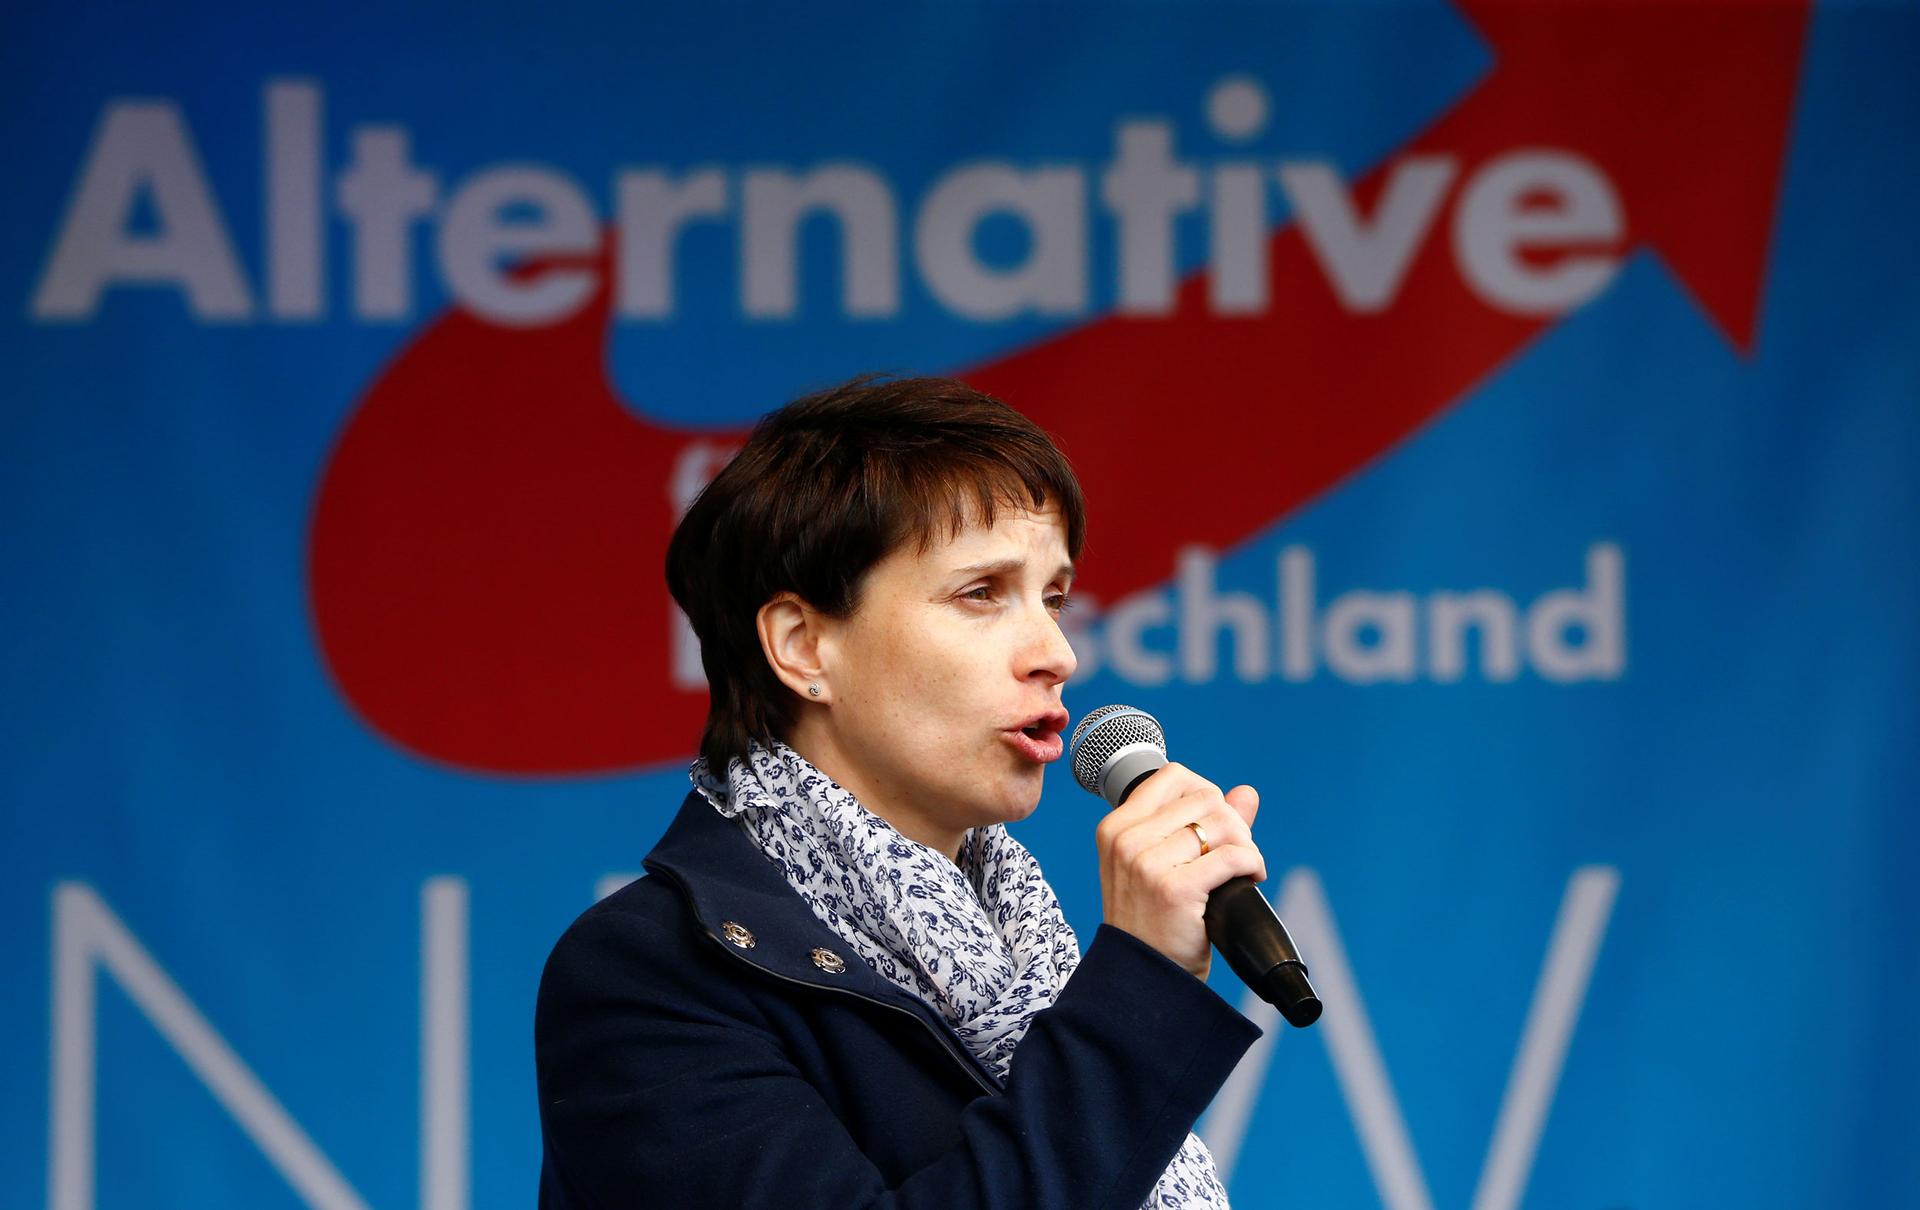 Frauke Petry, the former leader of the anti-immigration party, Alternative for Germany (AfD), said Trump’s election heralded 